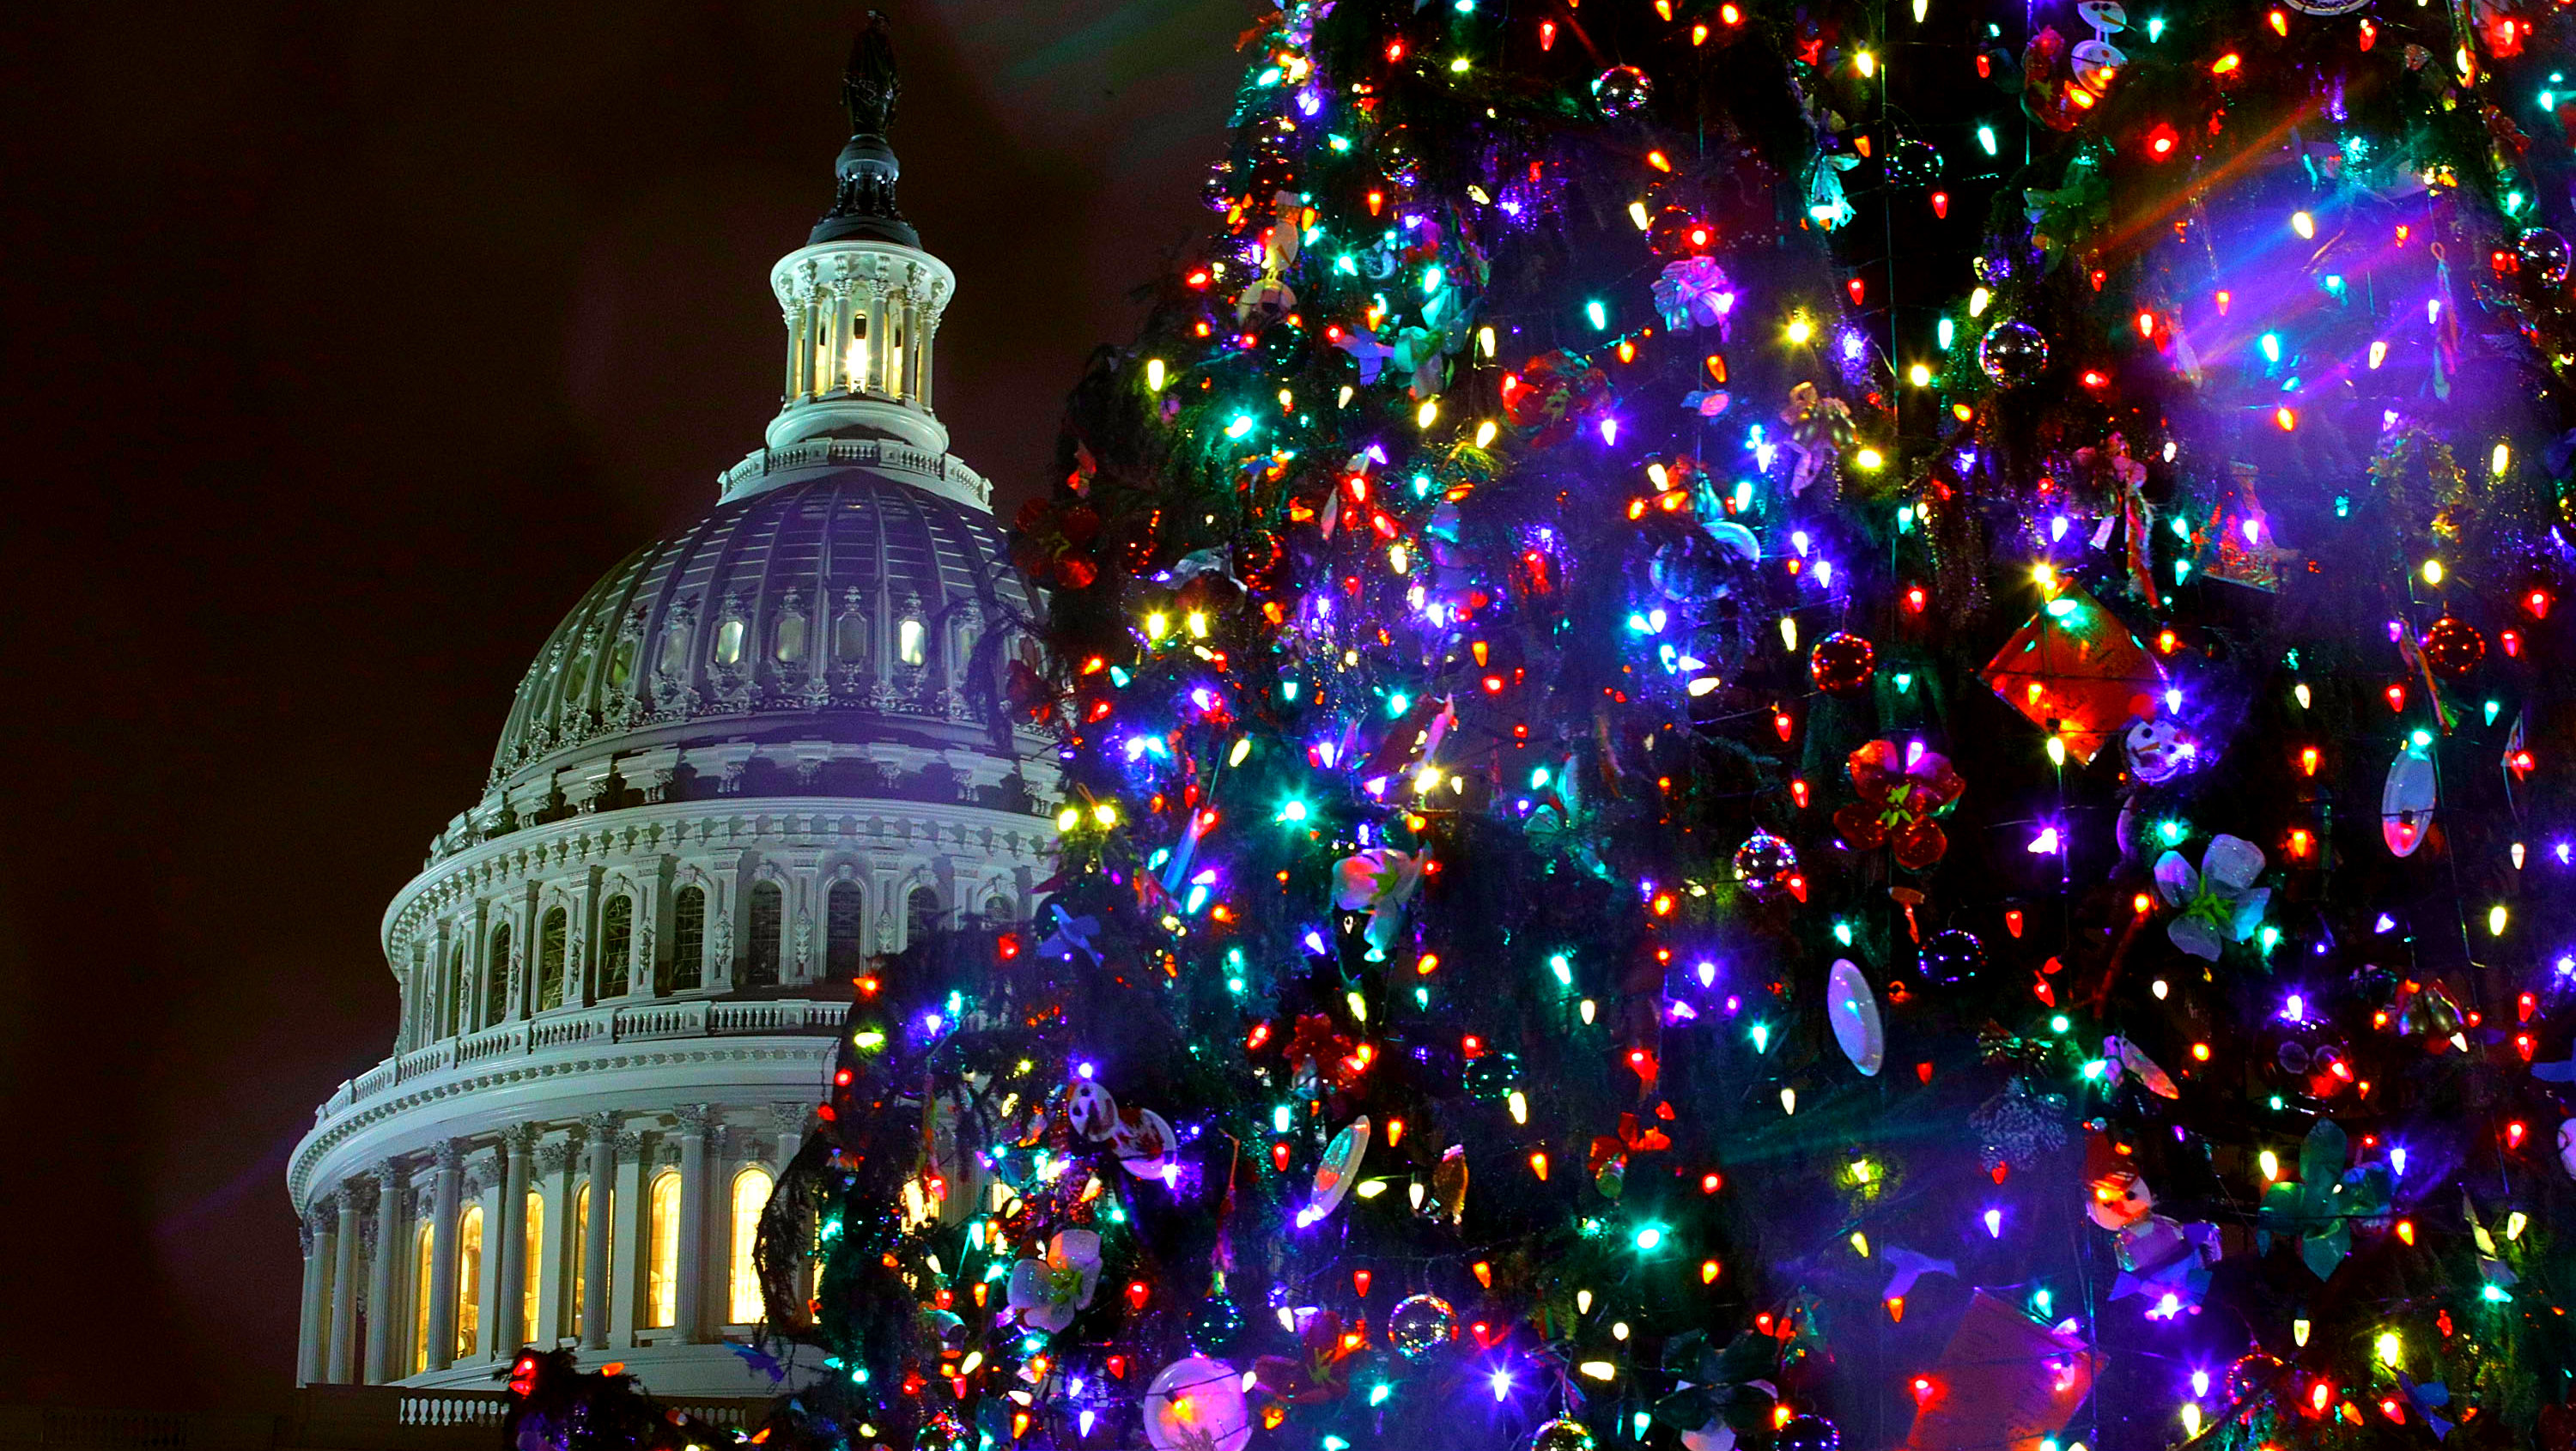 An 80ft Christmas tree lights up the west front lawn of the White House in Washington DC